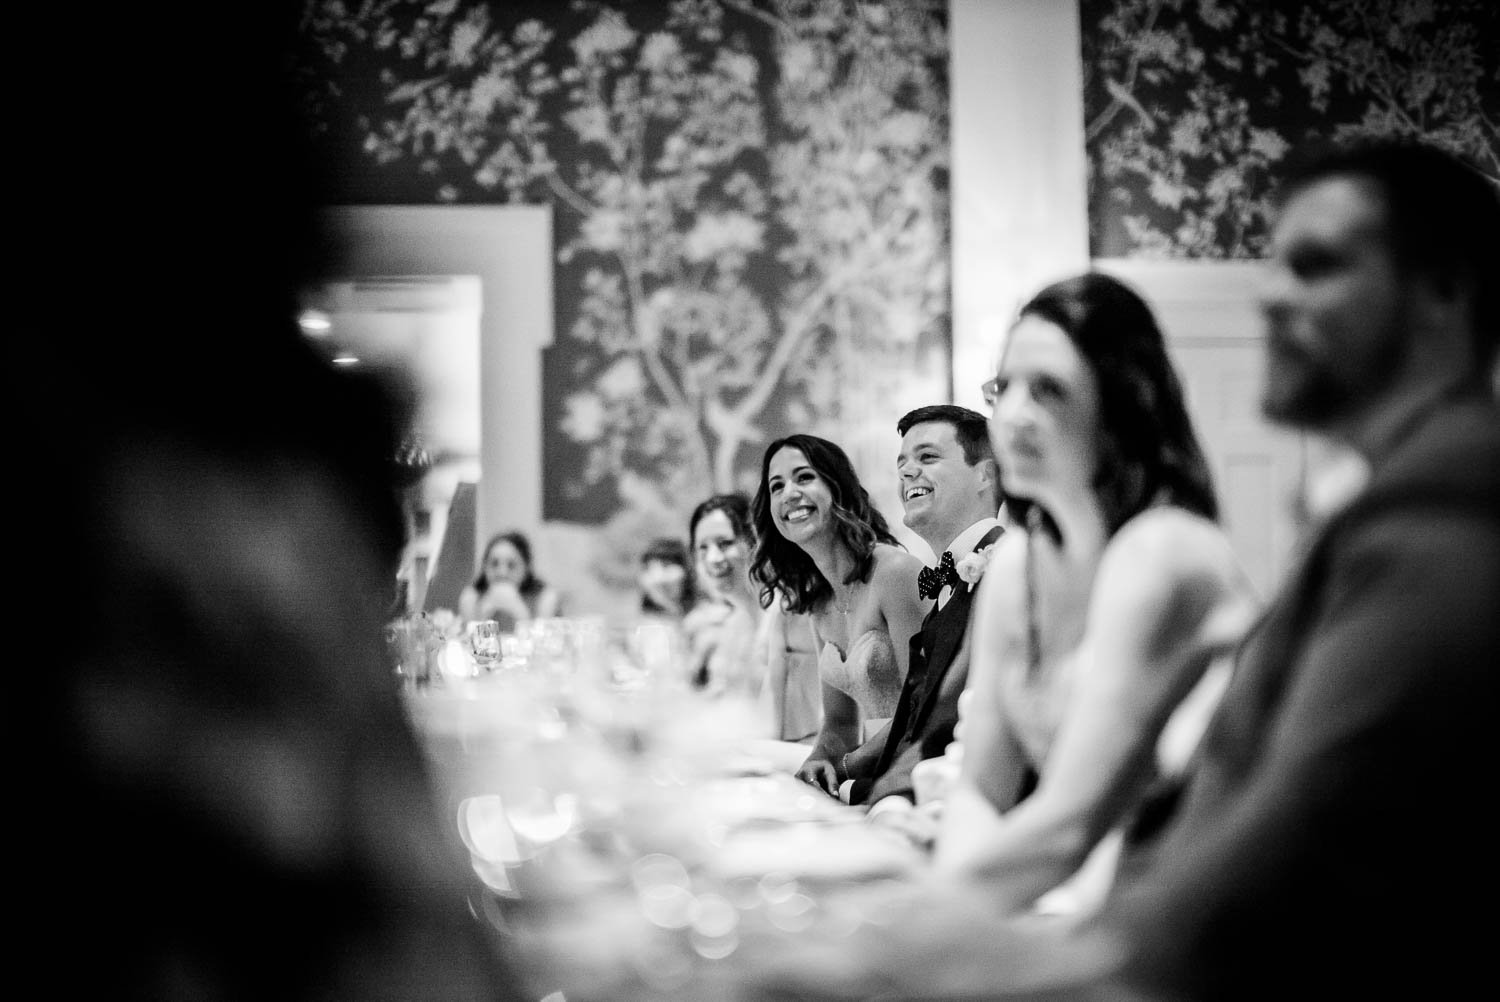 Jokes are made during toast at wedding reception River Oaks Country Club-Leica photographer-Philip Thomas Photography